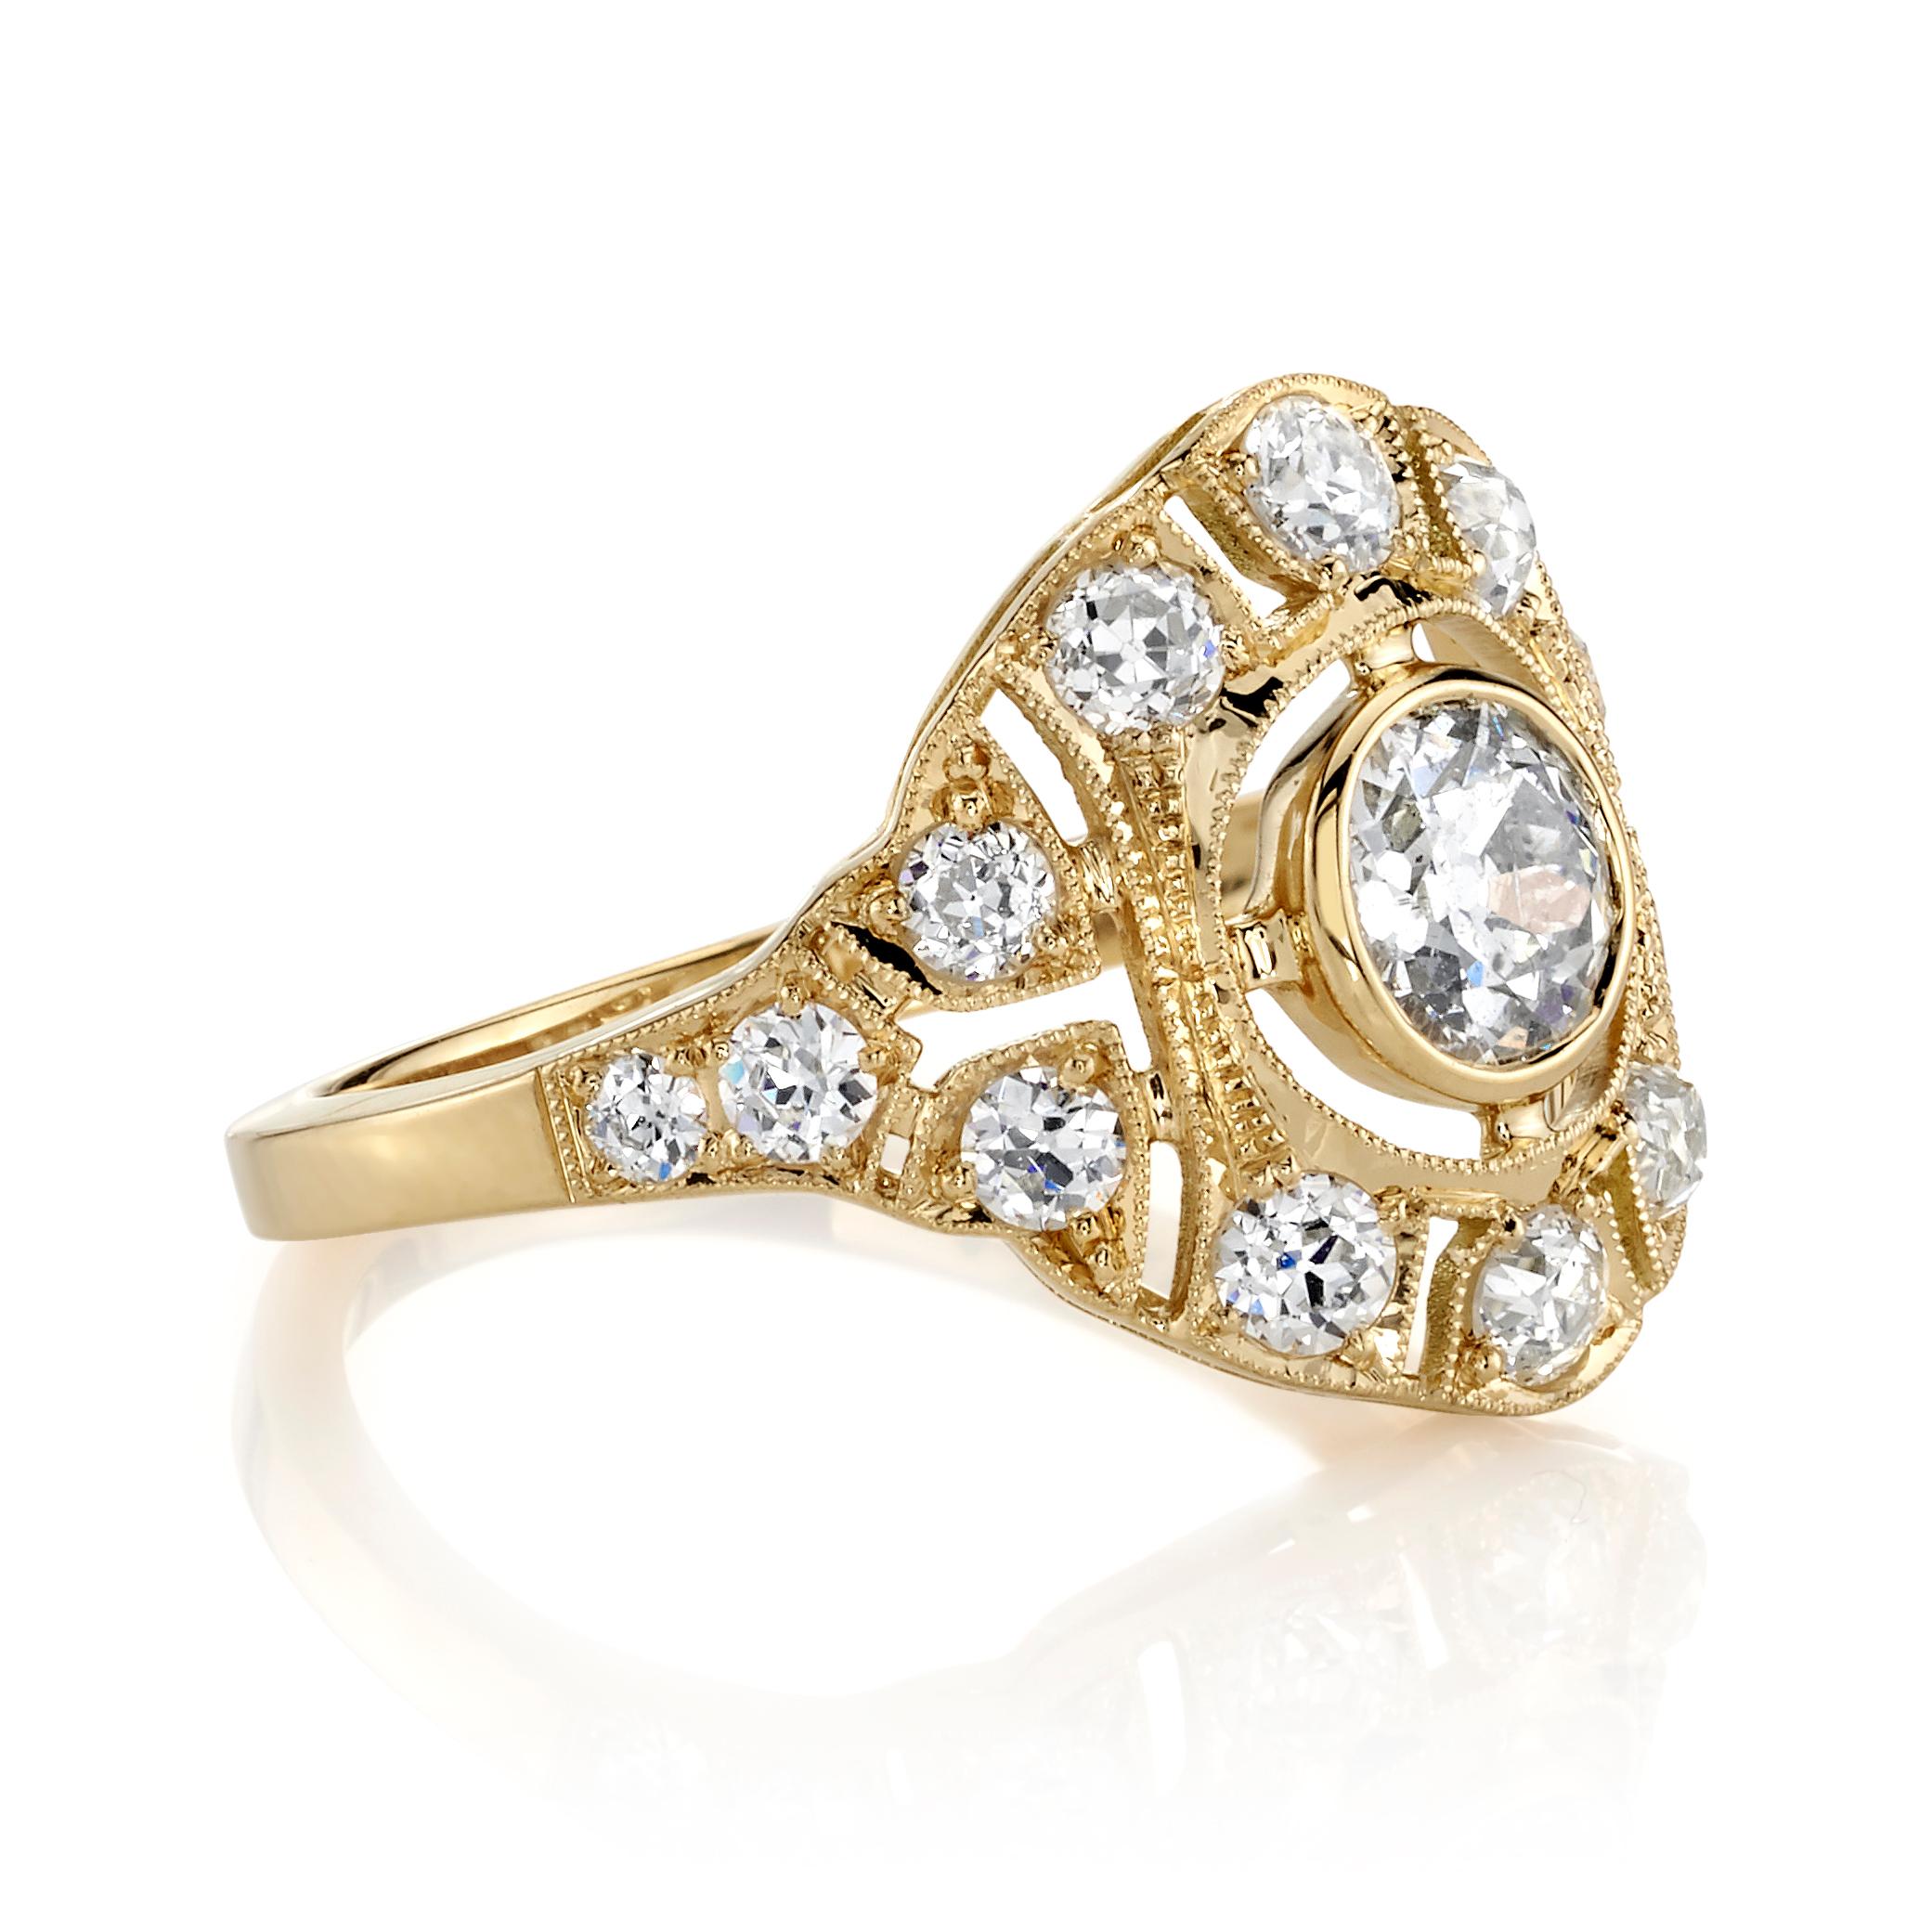 0.57ct F/I1 GIA certified old European cut diamond with 0.75ctw diamond accents set in a handcrafted 18K yellow gold mounting. Ring is currently a size 6 and can be sized to fit.